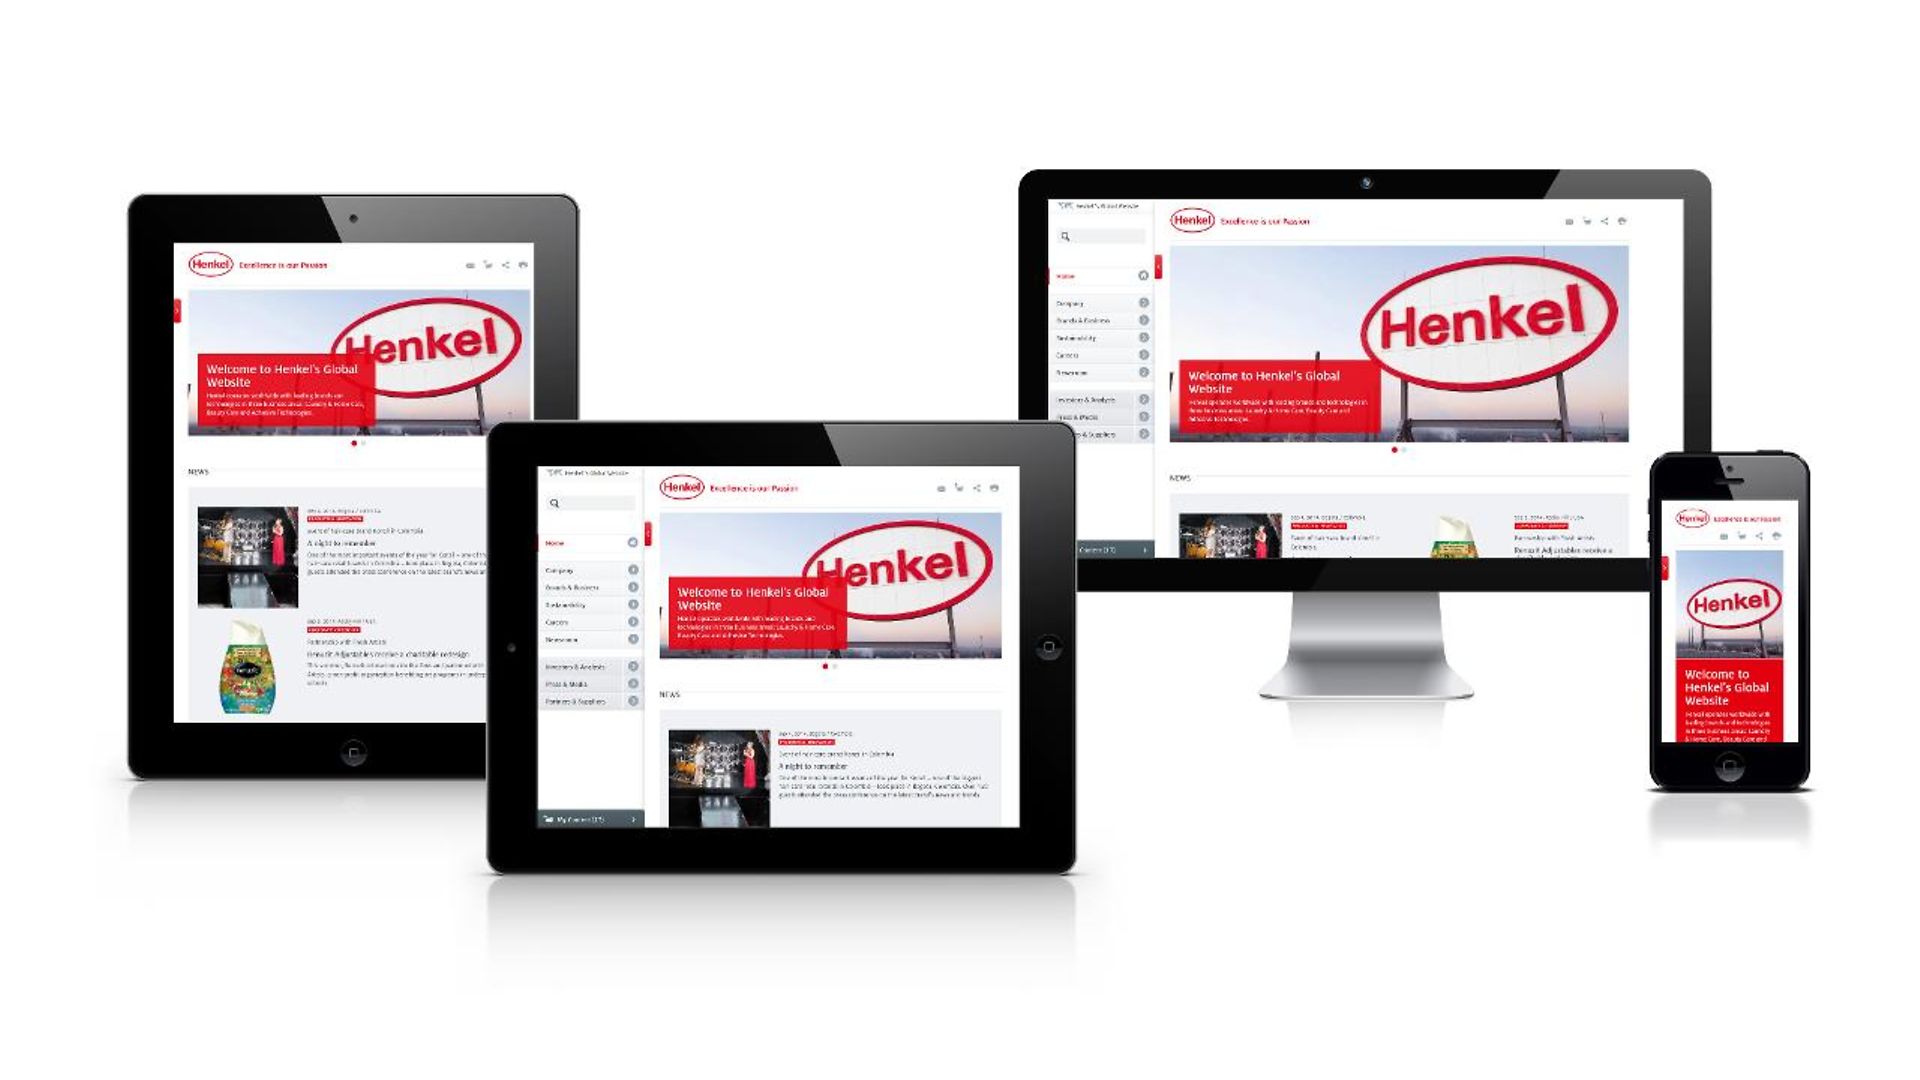 The new Henkel corporate website works on all devices thus providing the best user experience.